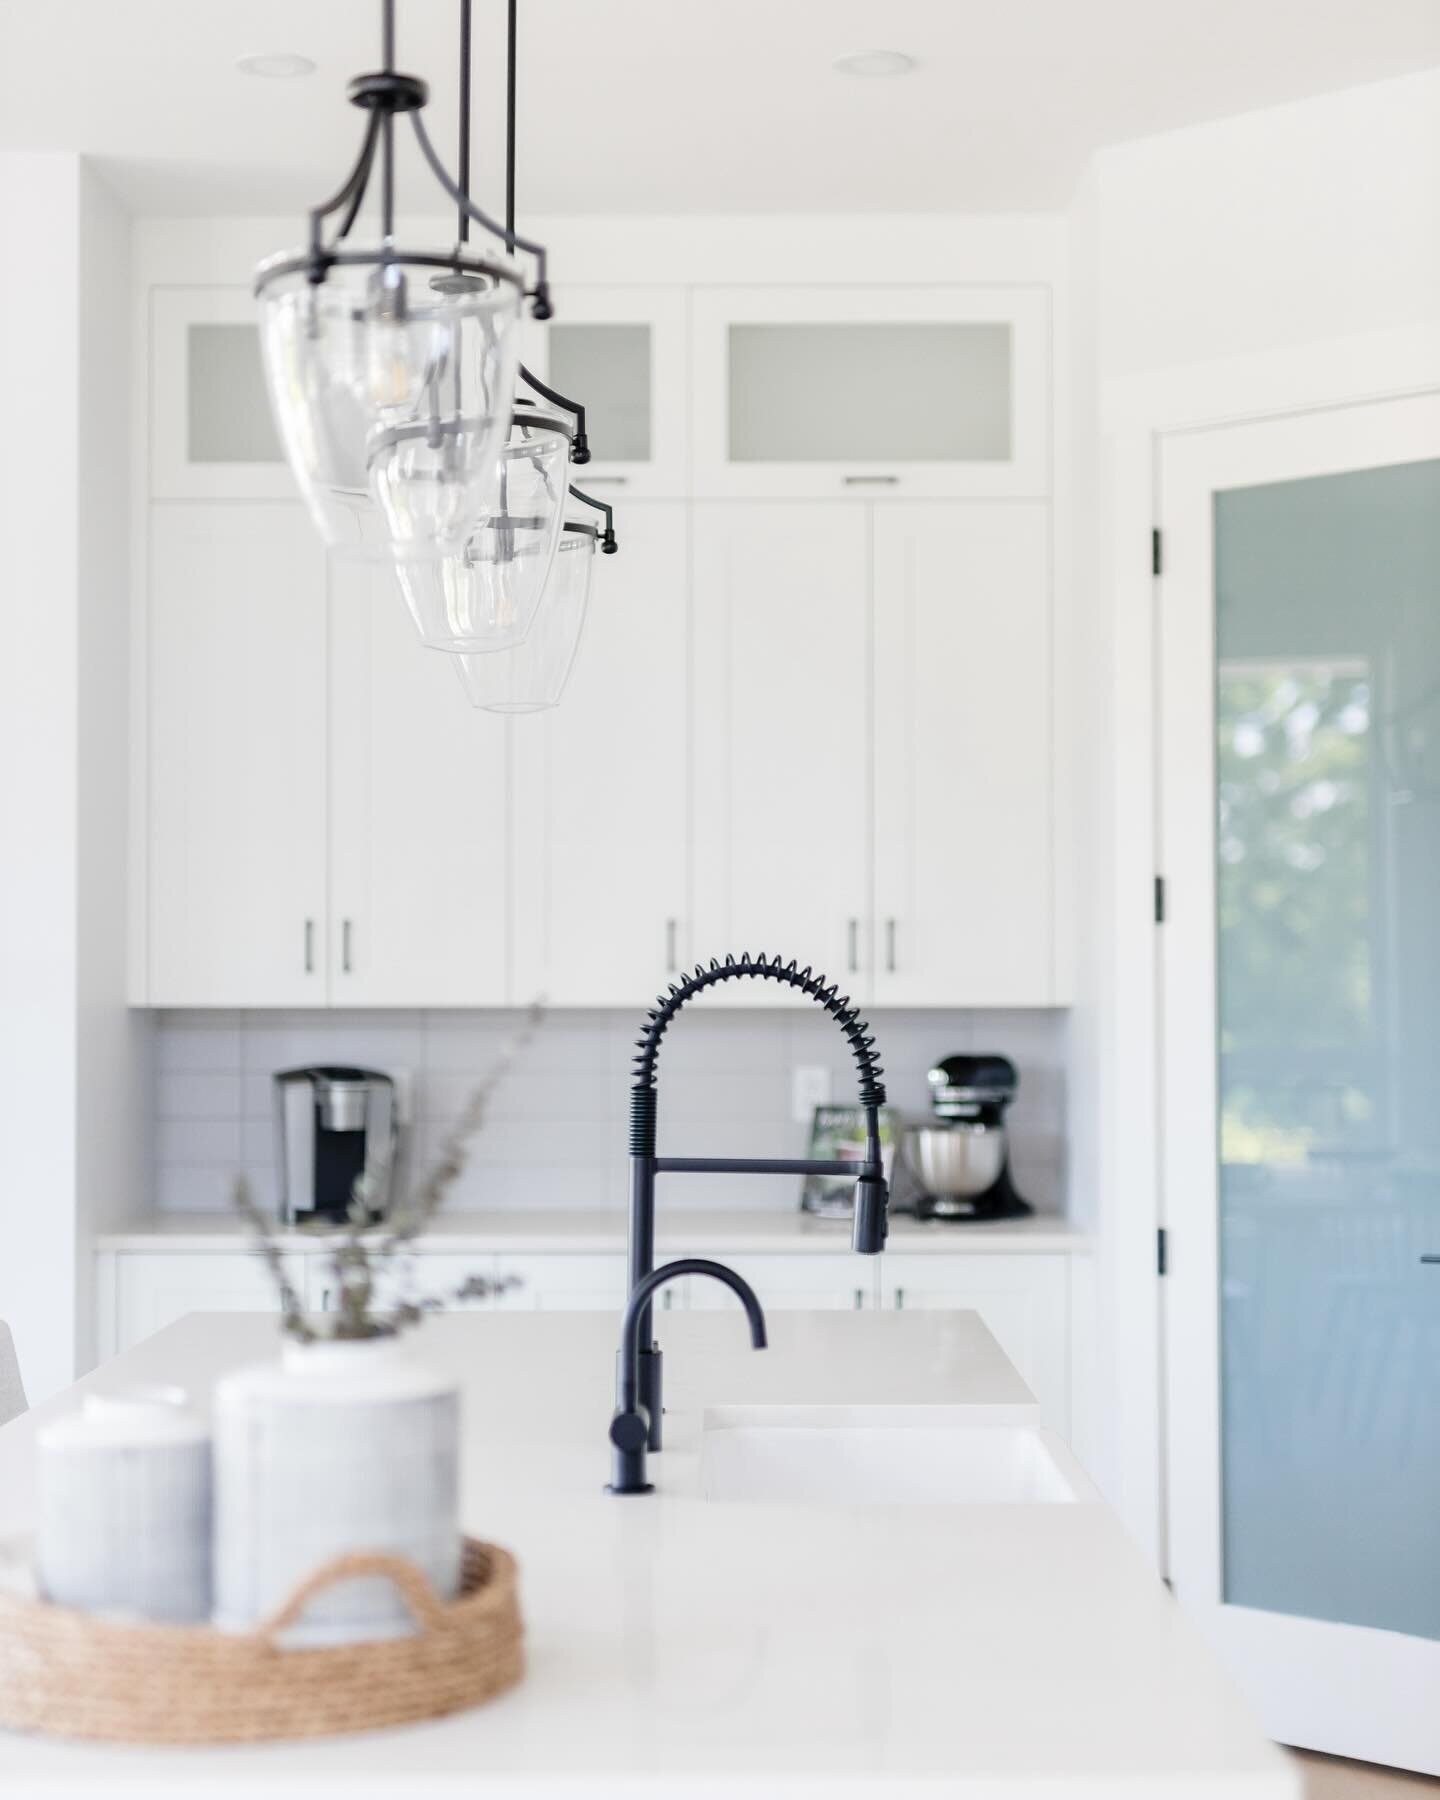 Create the ultimate modern farmhouse vibe in your kitchen with white cabinets and black accents. Don&rsquo;t underestimate the power of a great faucet in tying it all together!
.
.
.
.
.
.
#interior #interiordecor #interiordesign #designbuilthome #cu